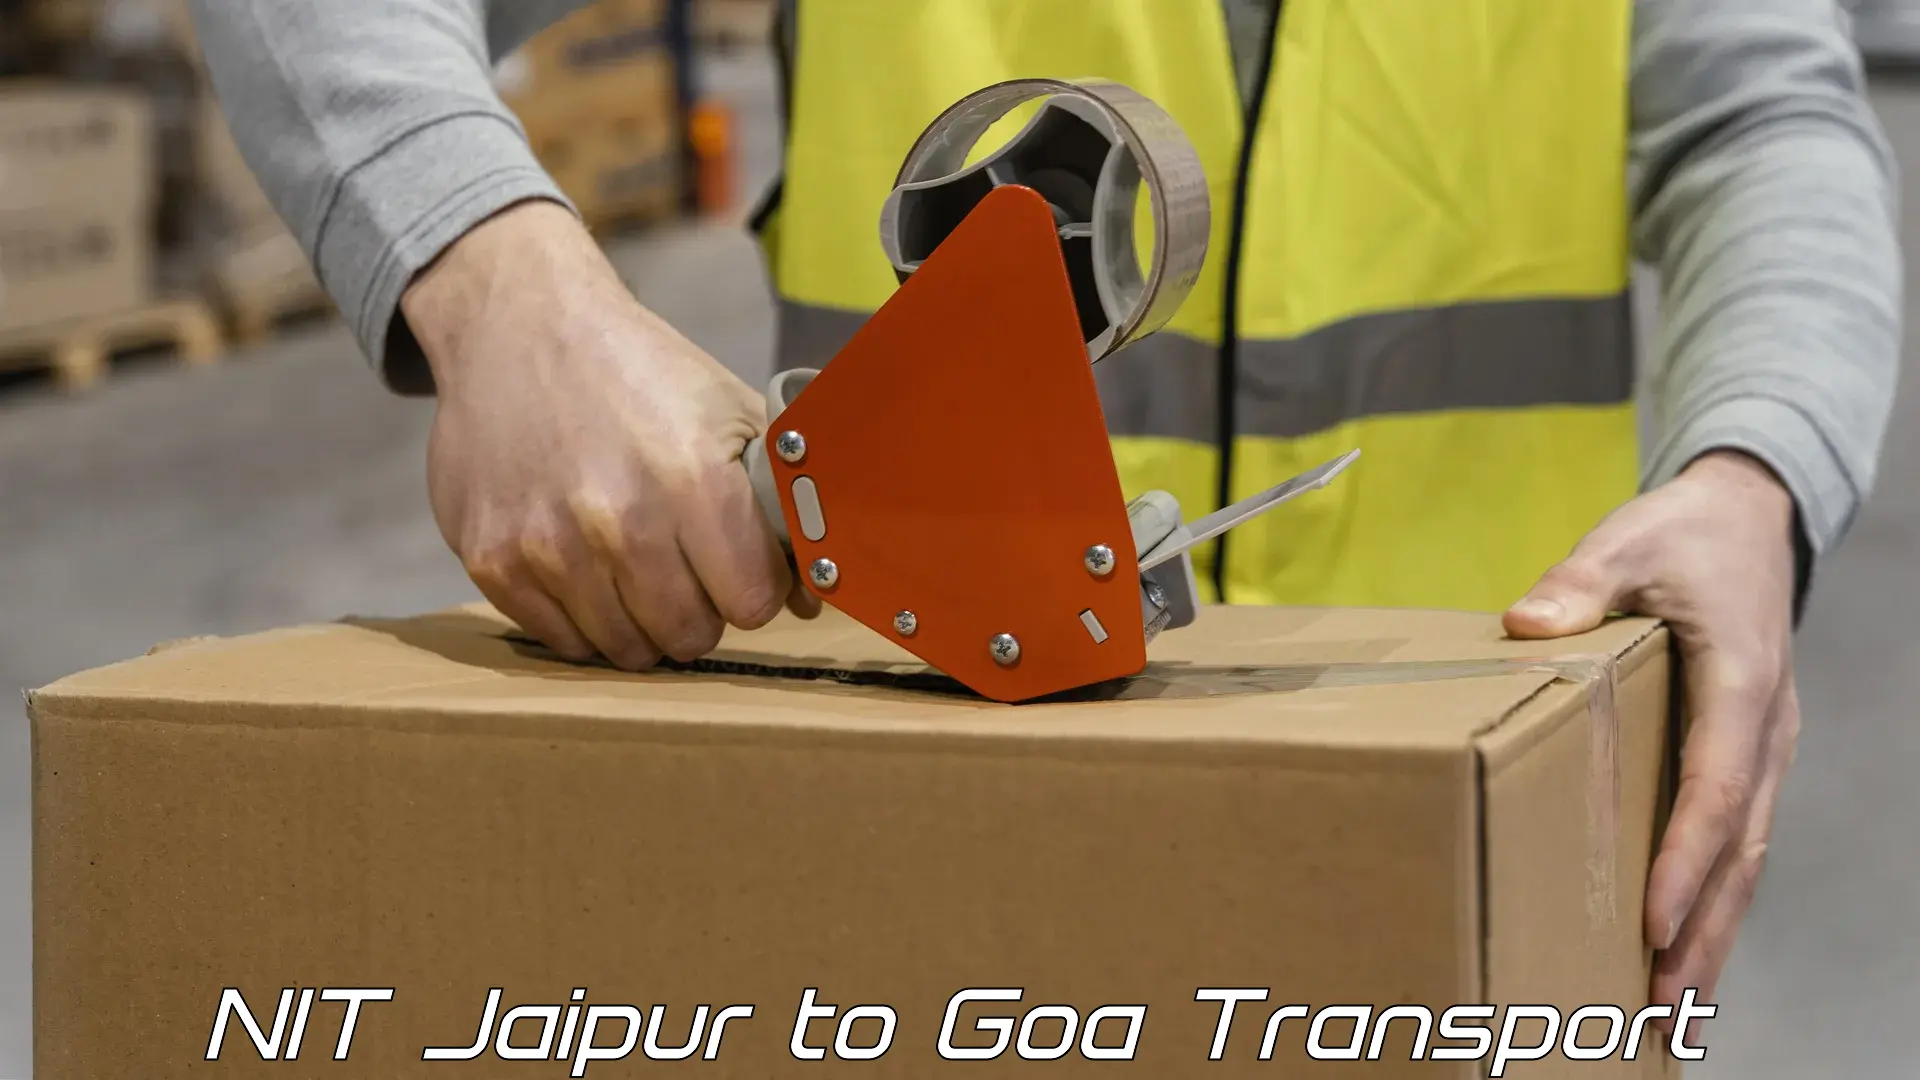 Goods delivery service NIT Jaipur to NIT Goa